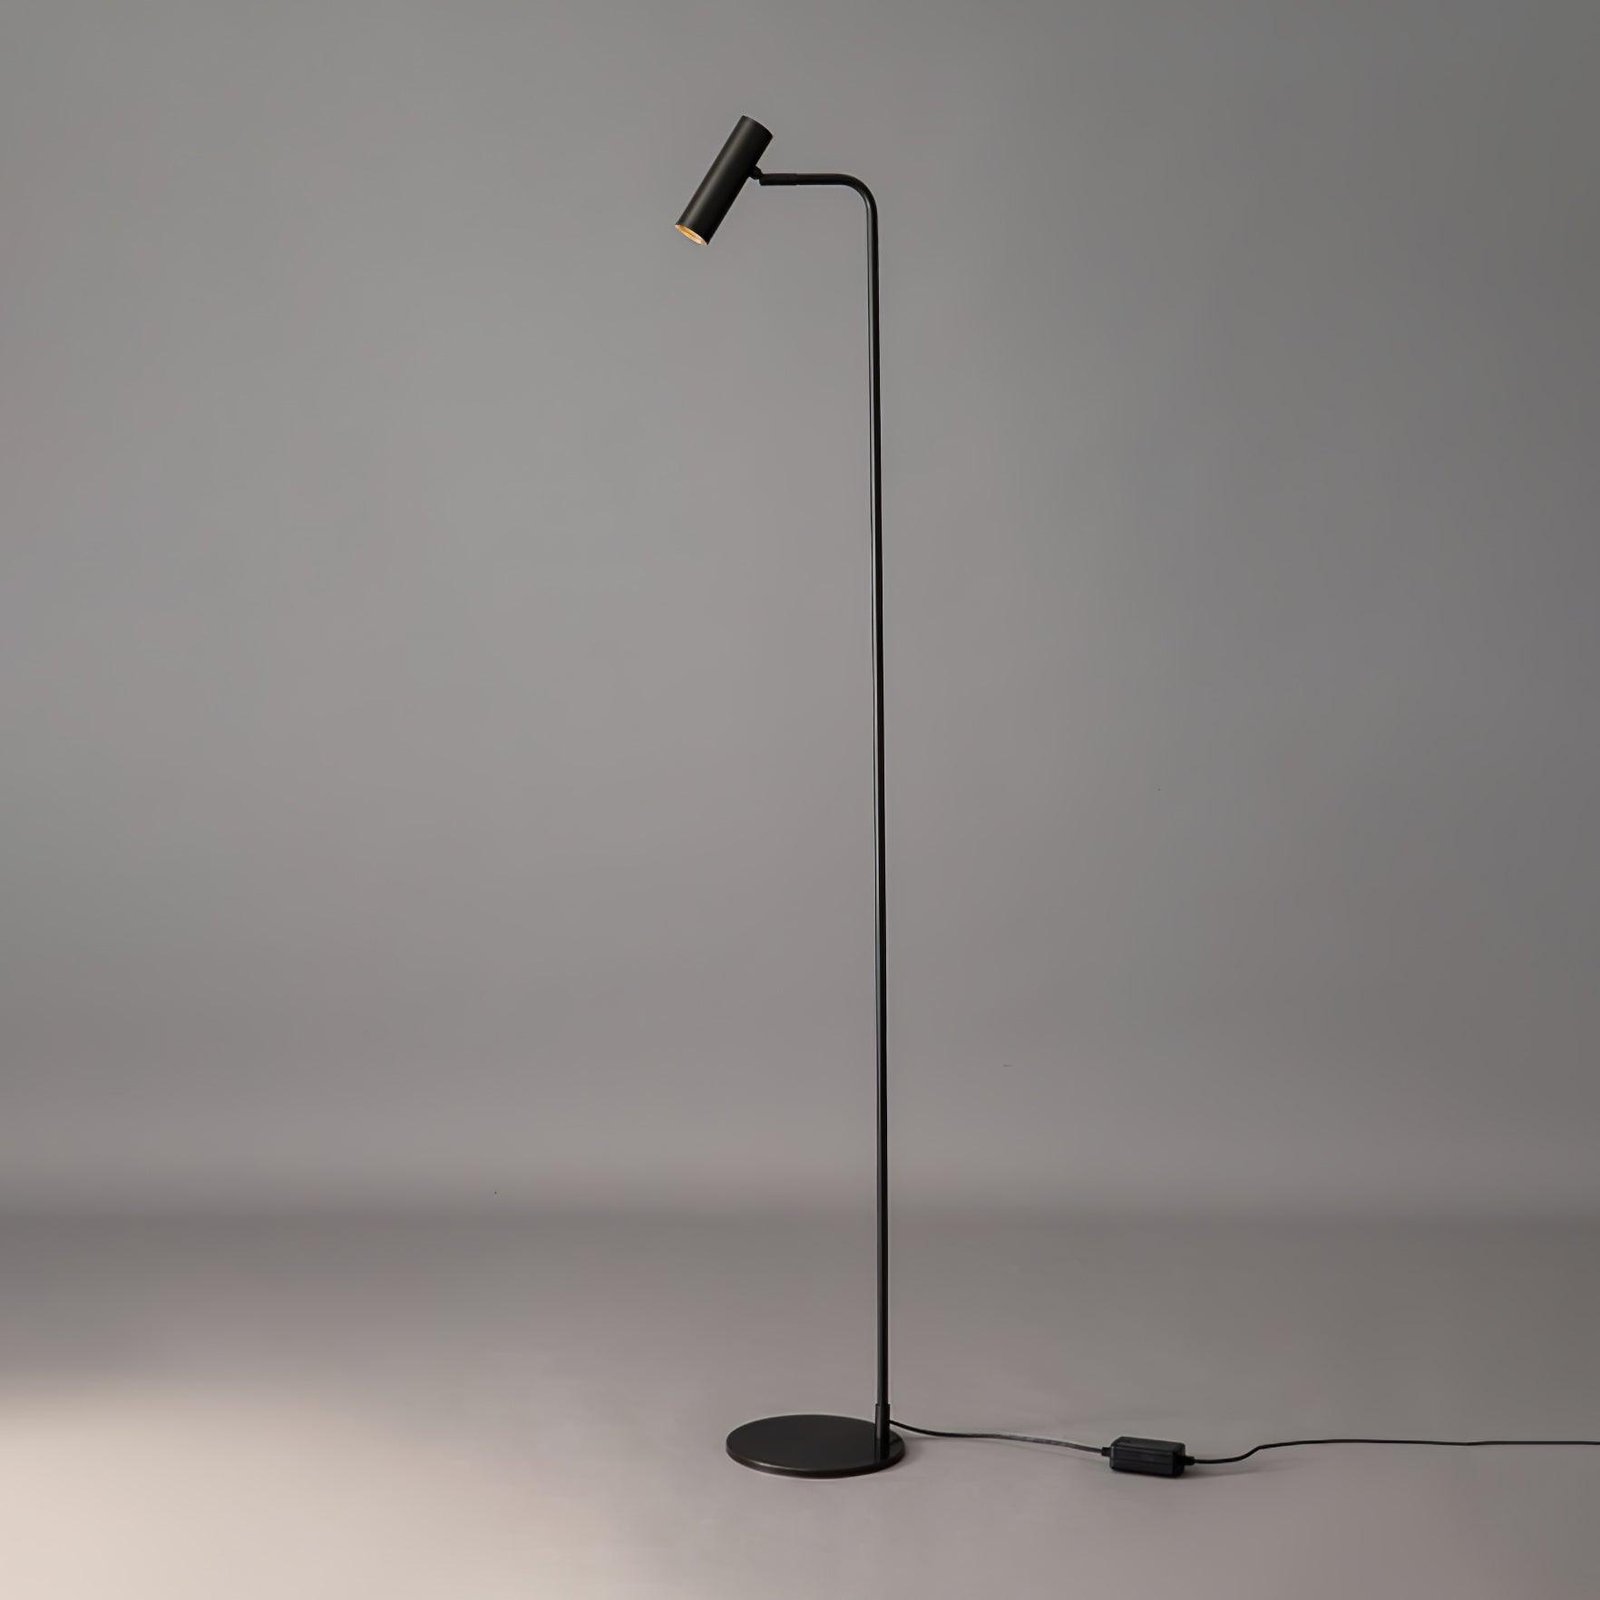 Black Torris Floor Lamp with UK Plug, measuring 7.9" in width and 57.4" in height (20cm and 146cm respectively).